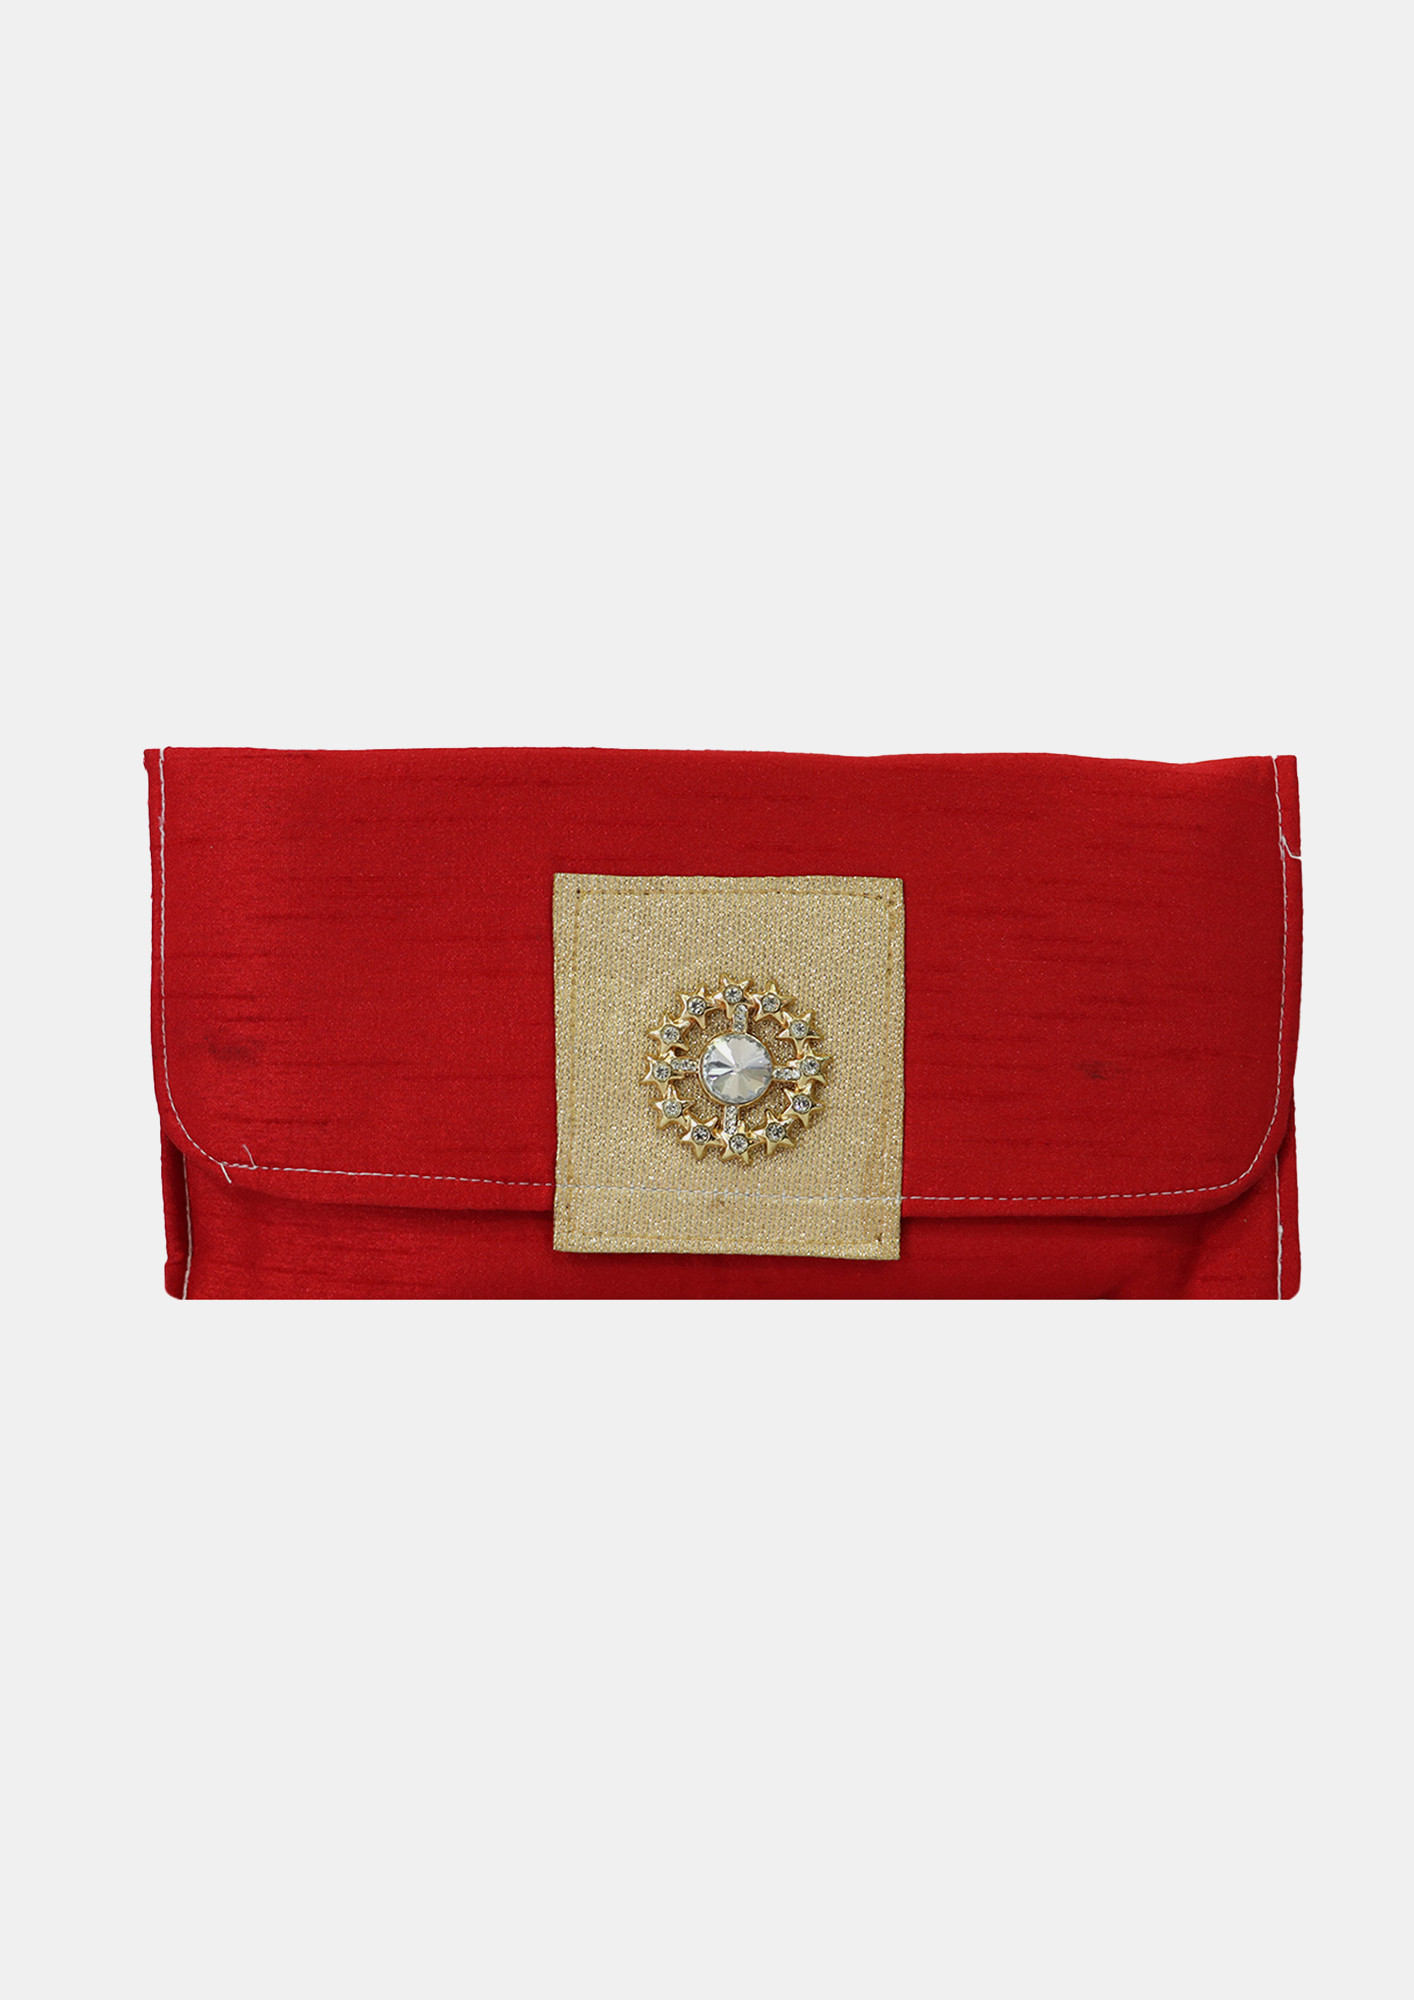 Indian Ethnic Clutch For Saree And Kurti